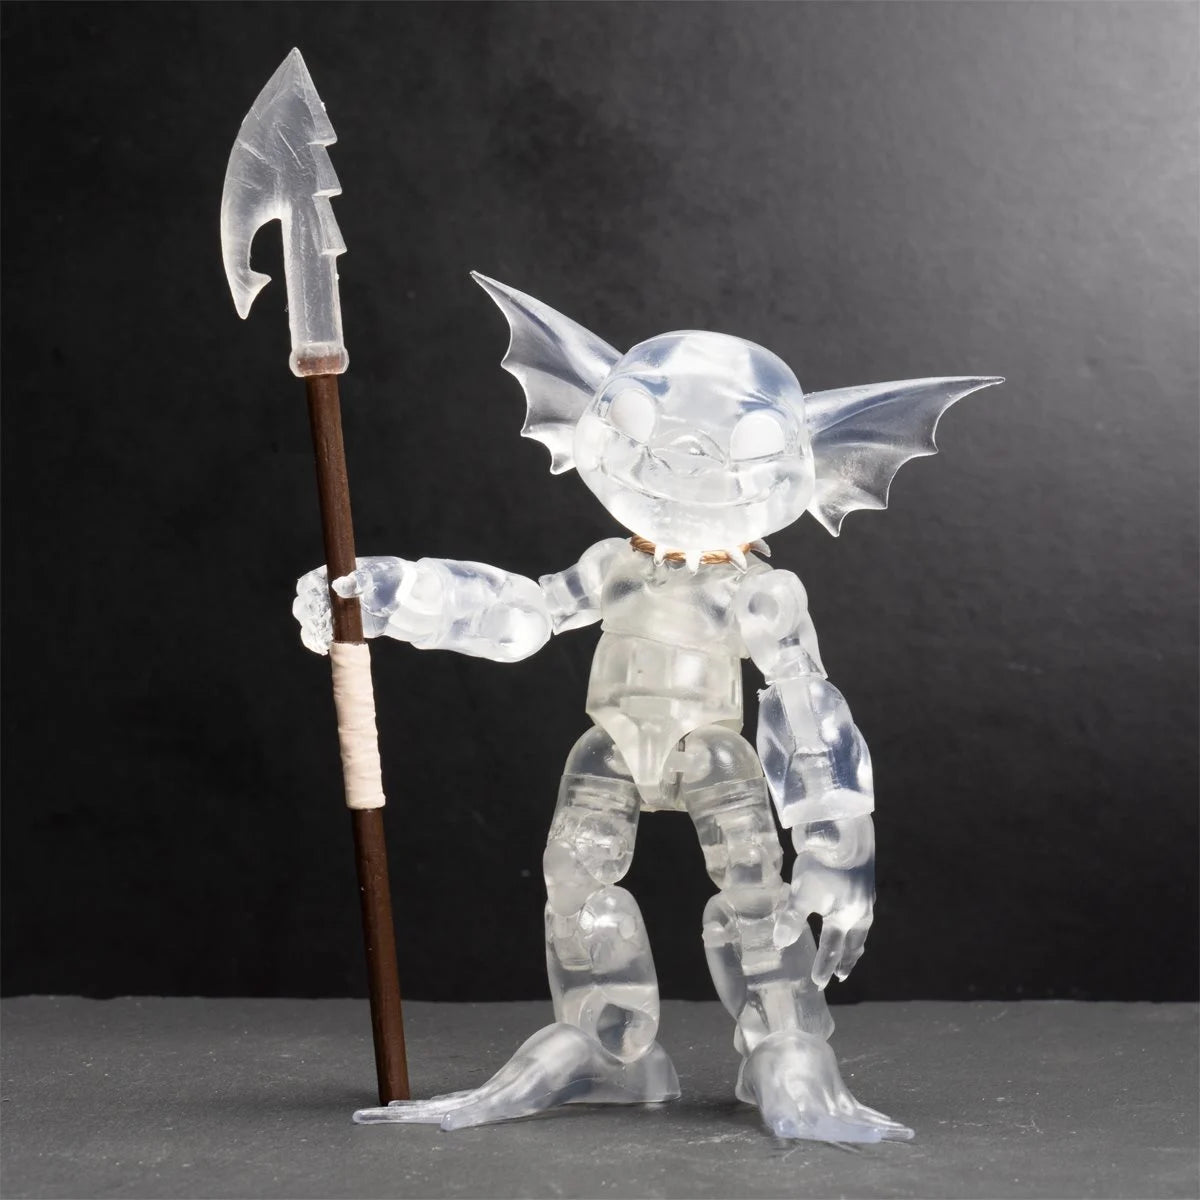 Plunderlings Drench Arctic Clear Variant 1:12 Scale Action Figure | SDCC Convention Exclusive-3